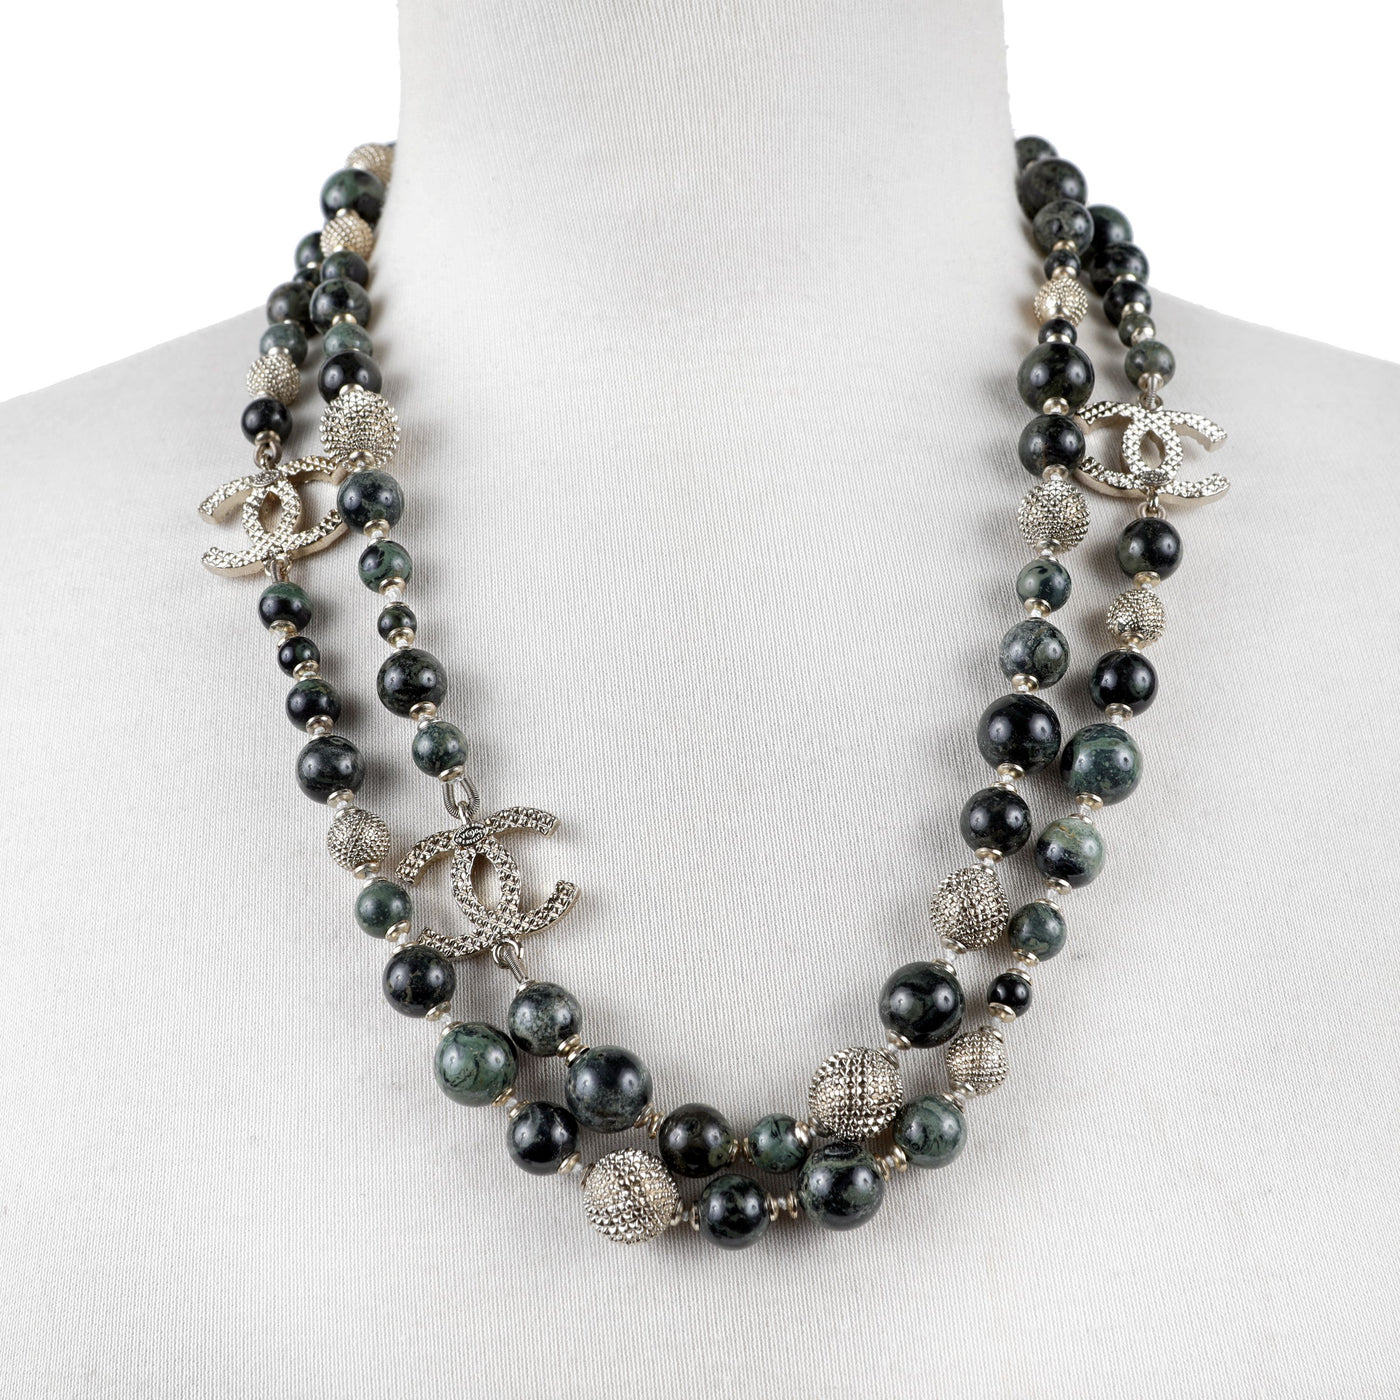 Chanel Byzantine Collection Polished Onyx Stones & Gold CC Necklace